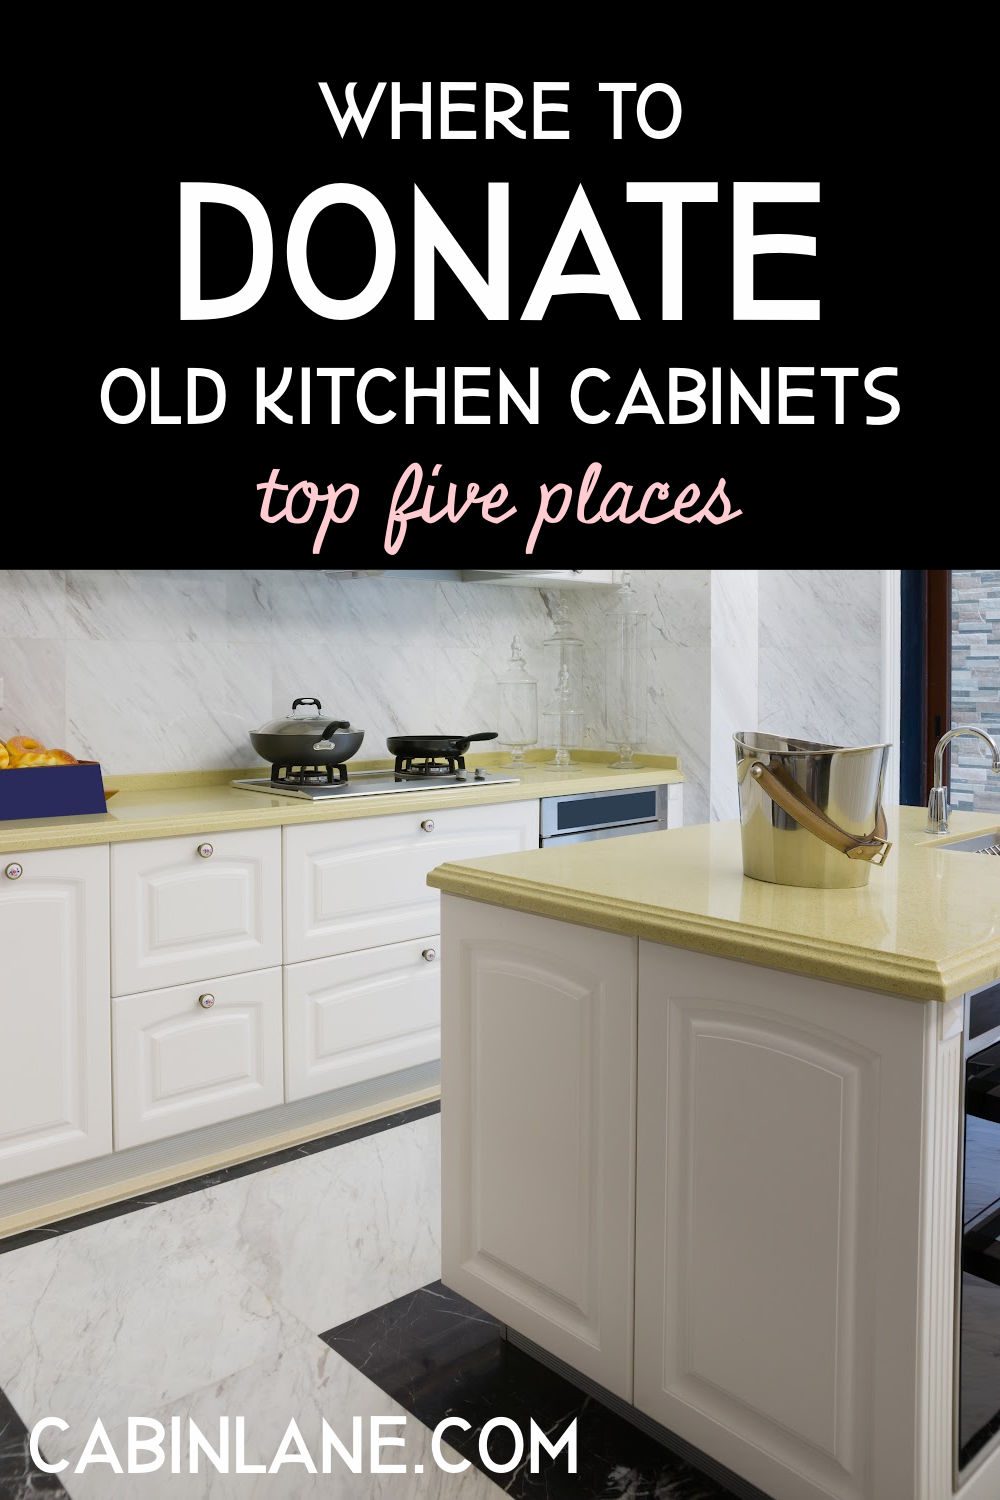 Where To Donate Old Kitchen Cabinets, Can You Donate Old Kitchen Cabinets